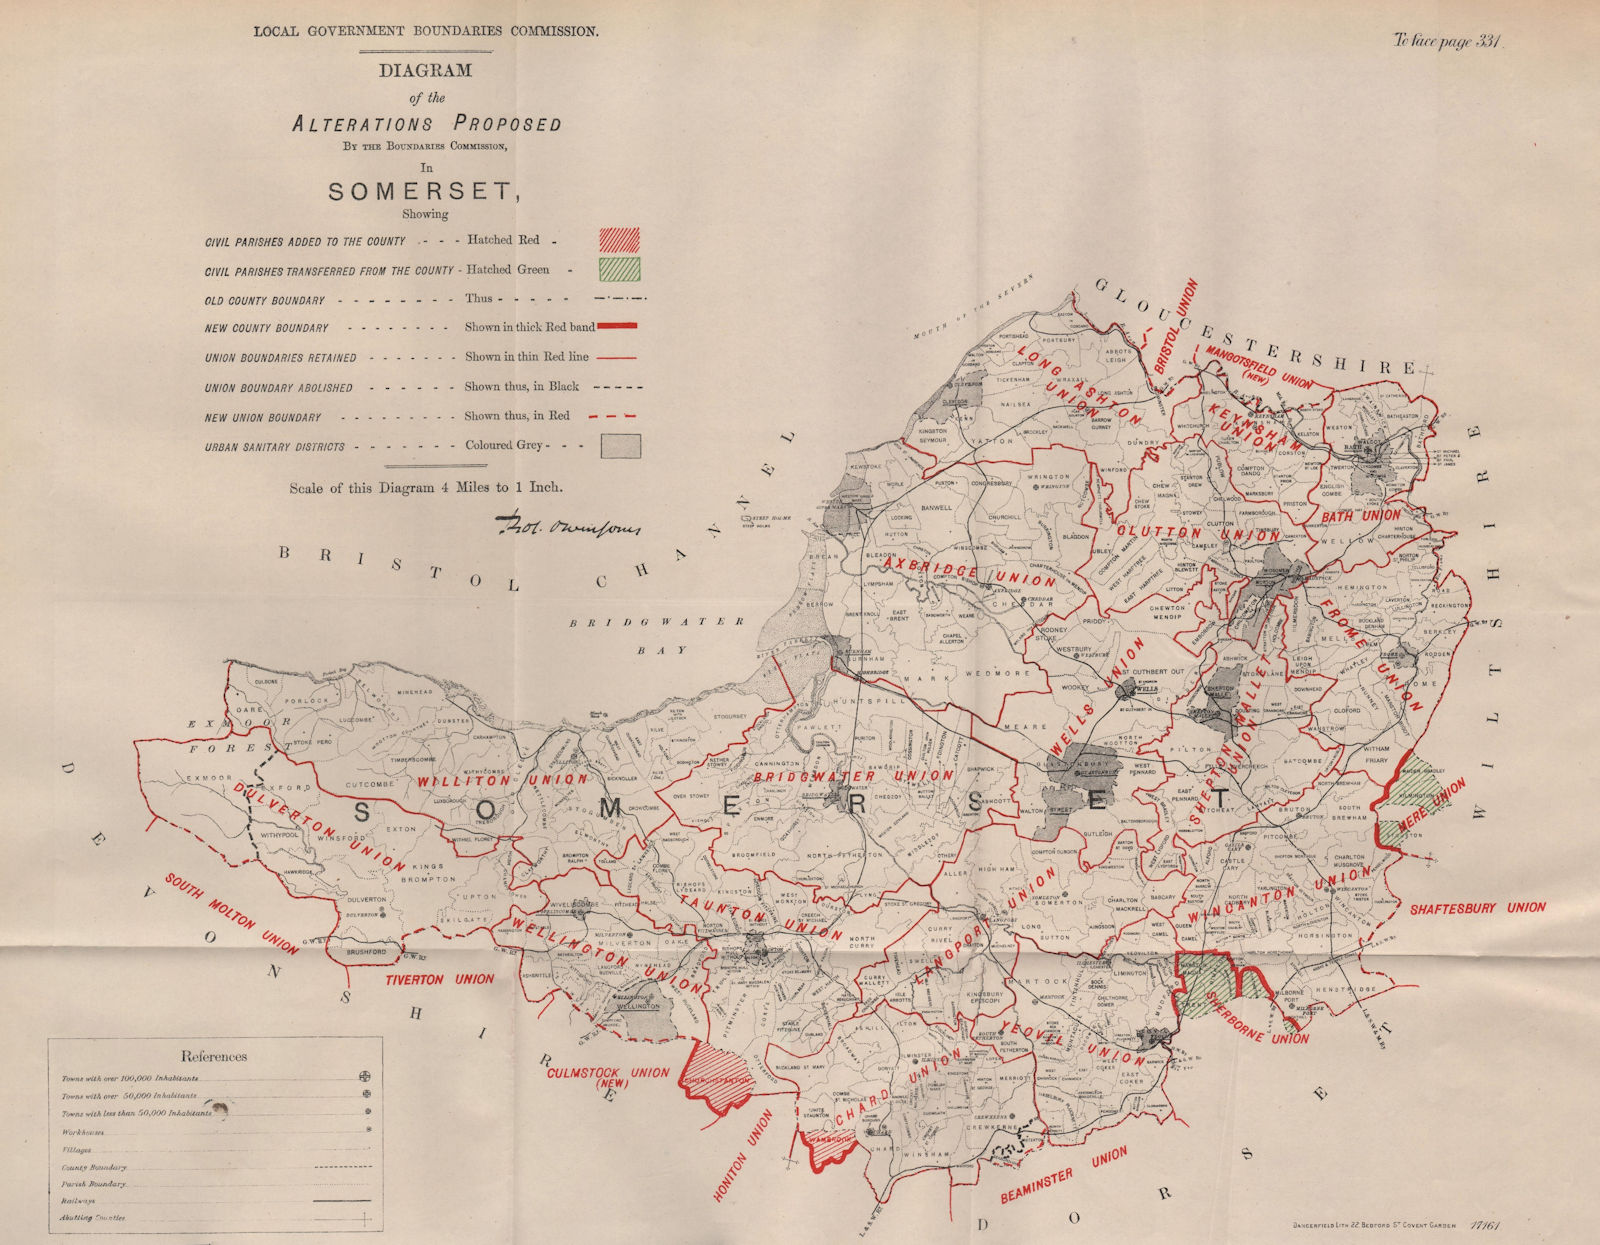 Alterations Proposed in Somerset. JONES. BOUNDARY COMMISSION 1888 old map